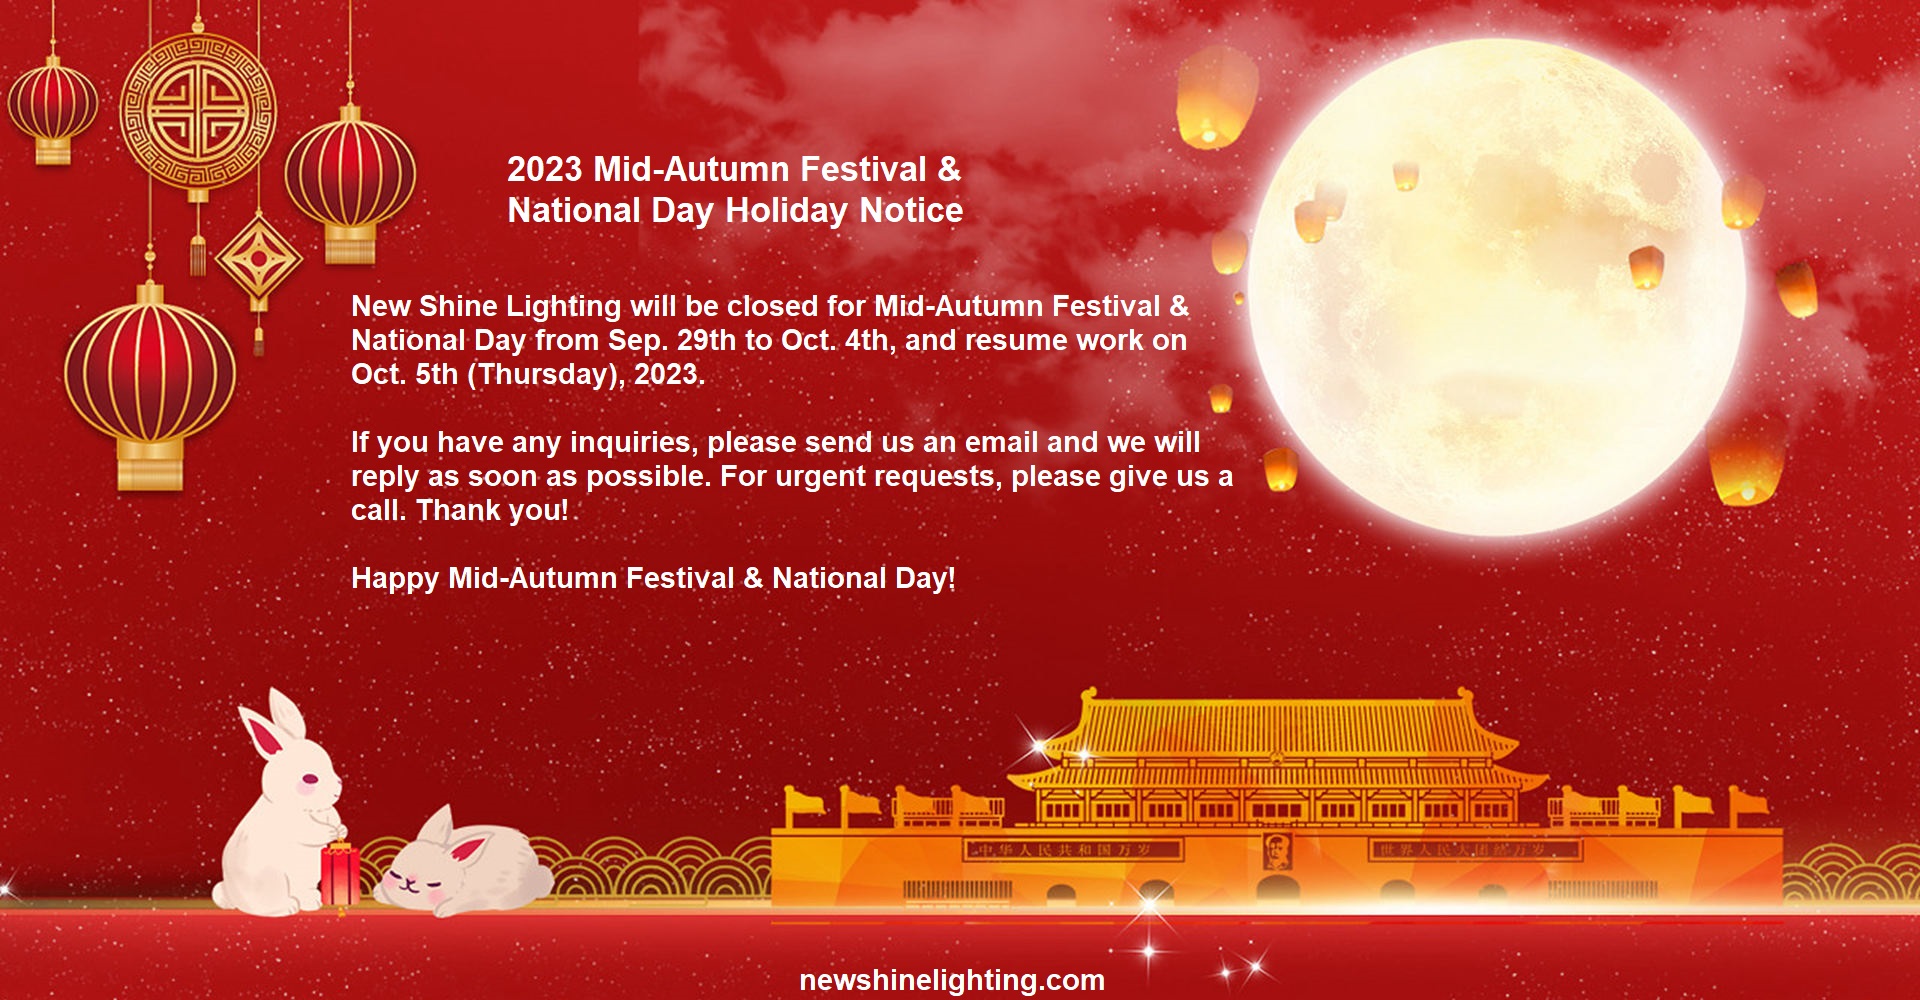 New Shine Lighting 2023 Mid-Autumn Festival and National Day Holiday